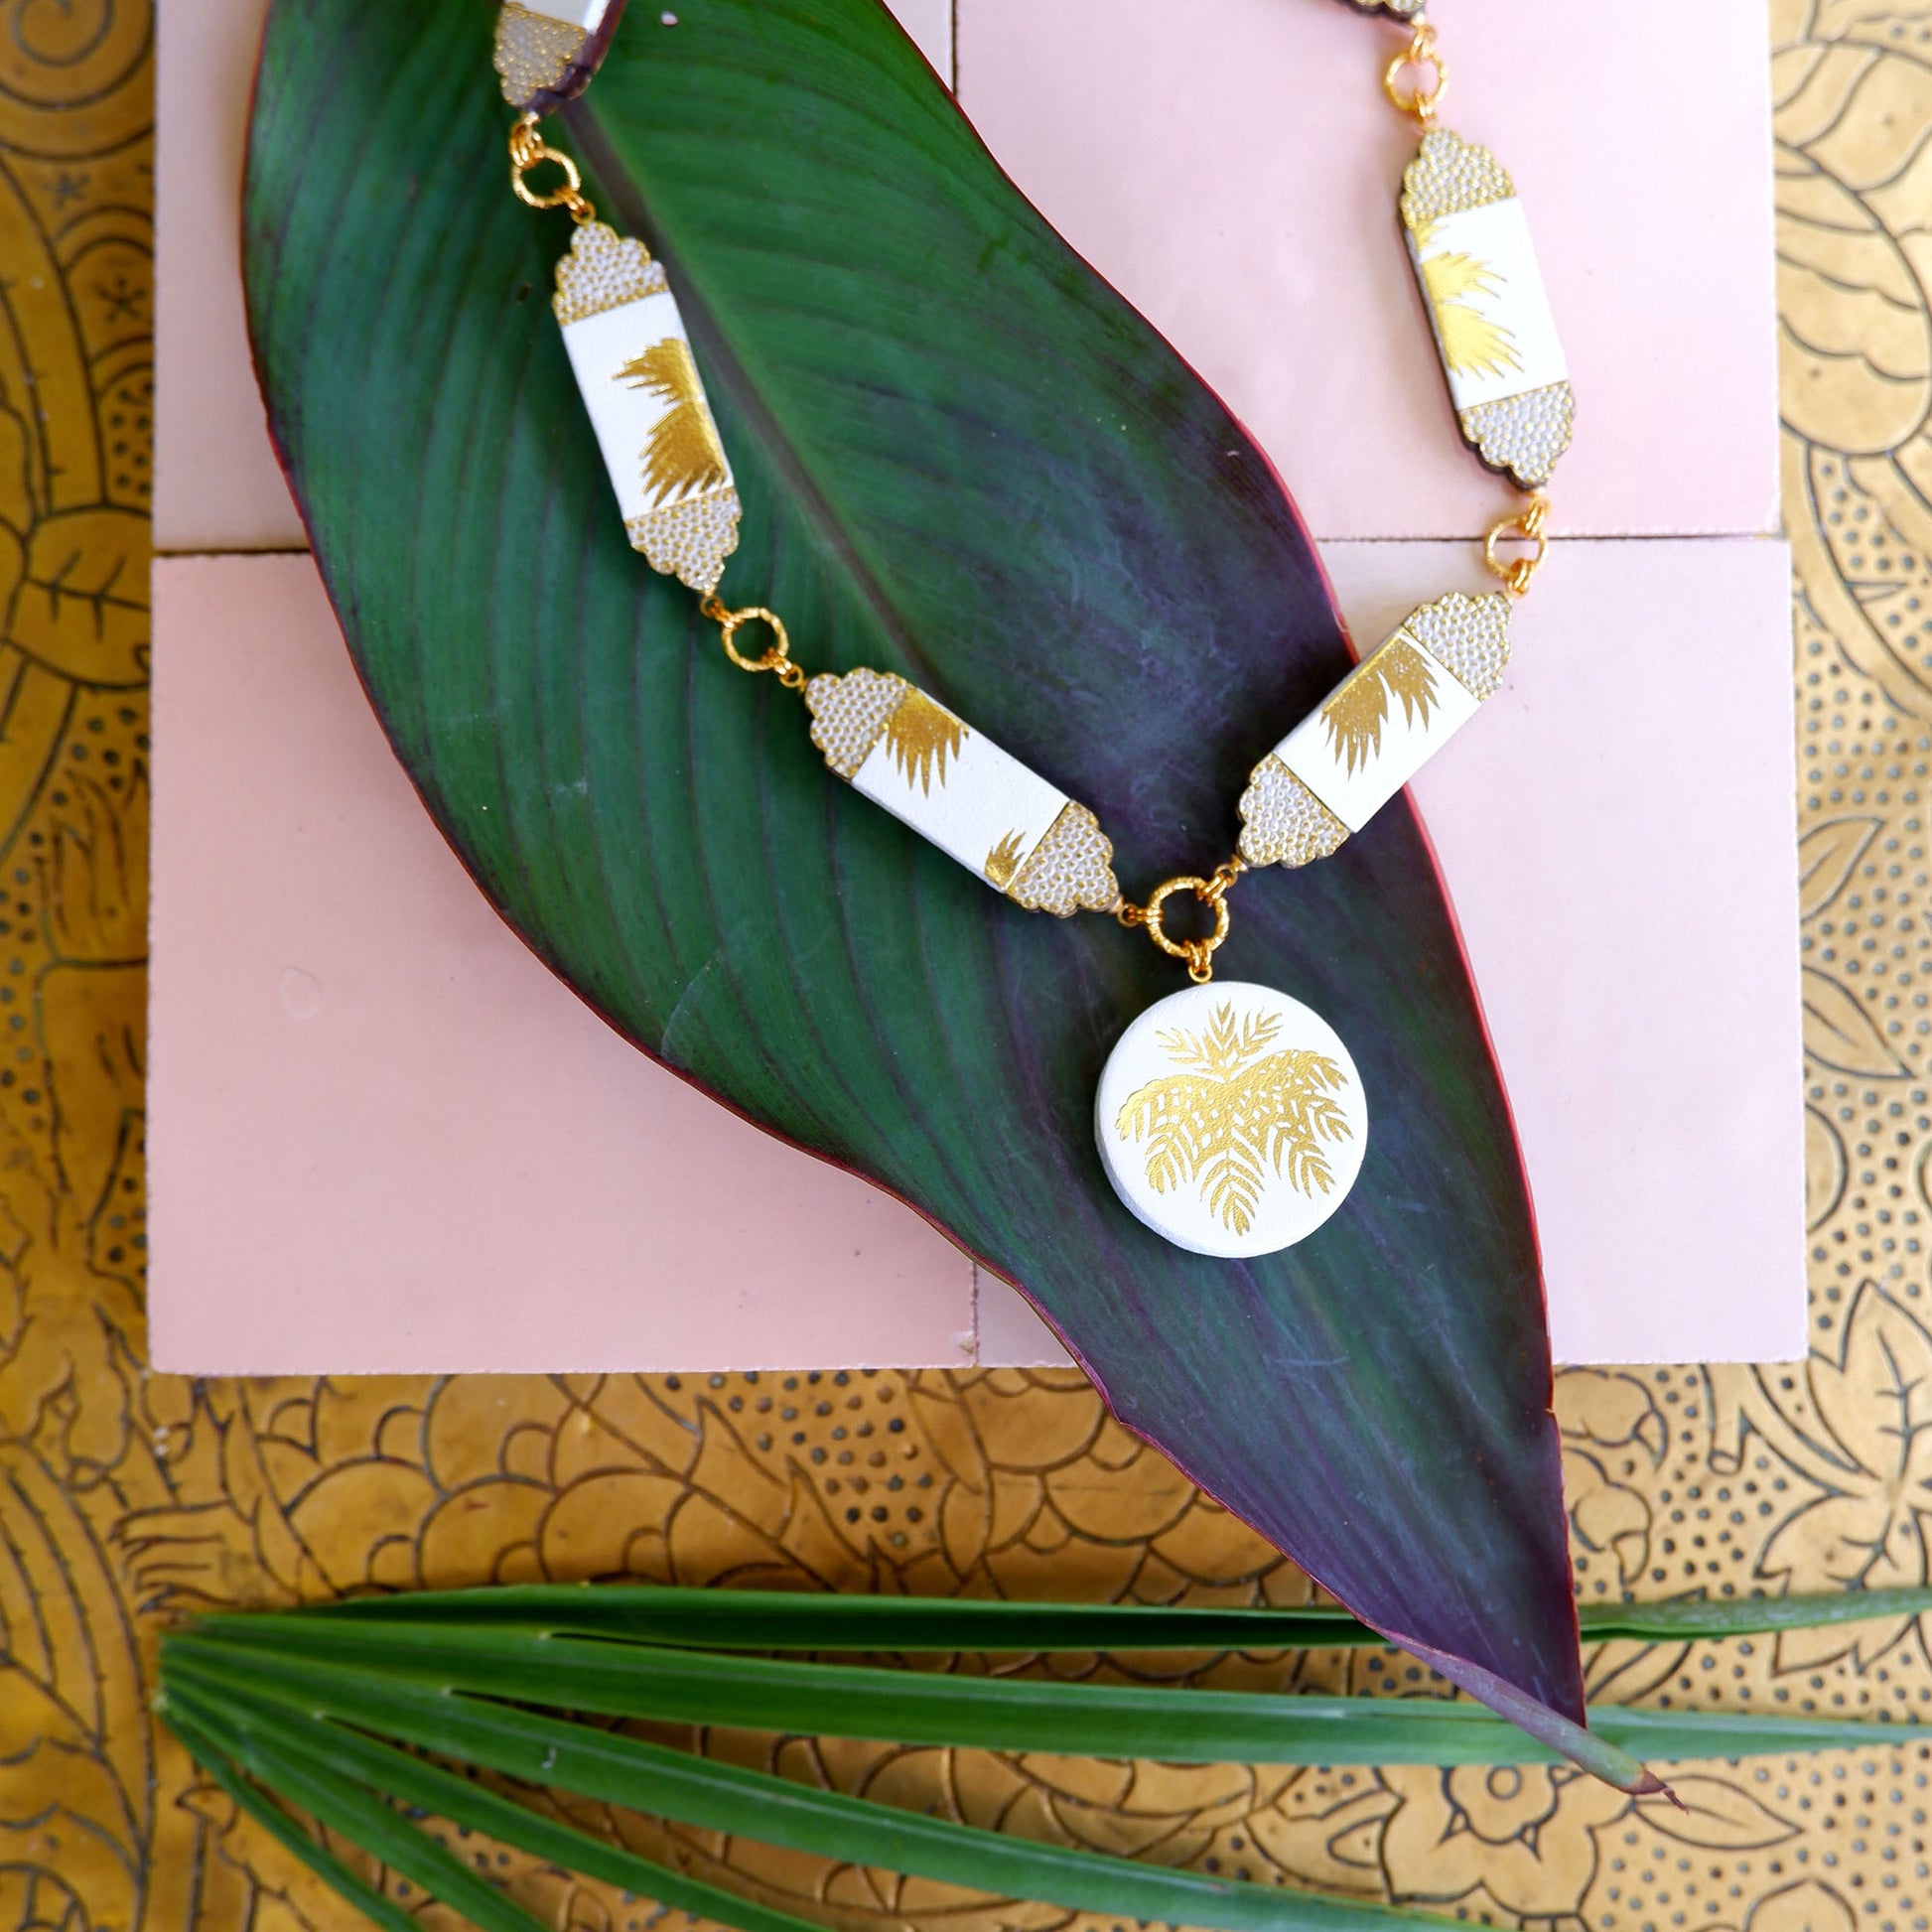 white leather necklace, with six sections & medallion pendant.. Gold Palm print on white leather, with embossed dot pattern detail., on tropical leaf